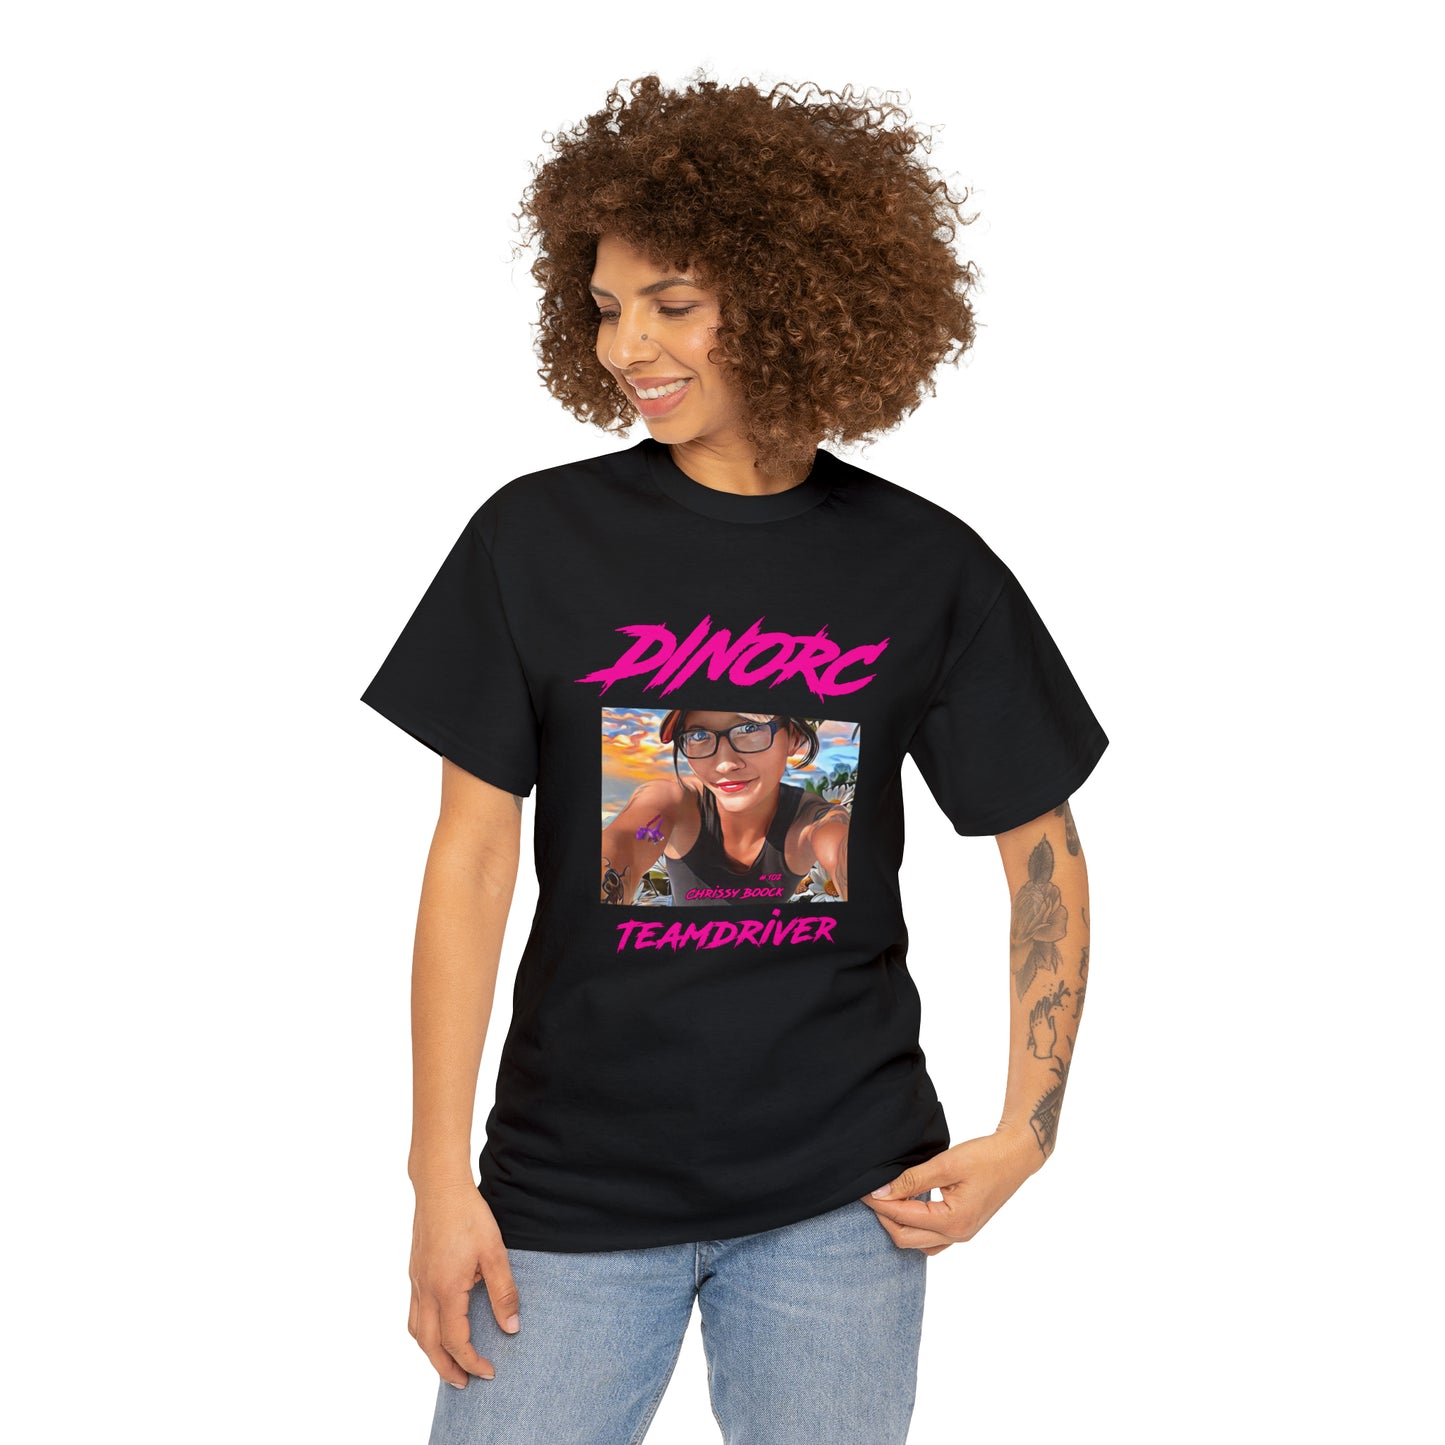 Crissy Book front DinoRC Logo T-Shirt S-5x